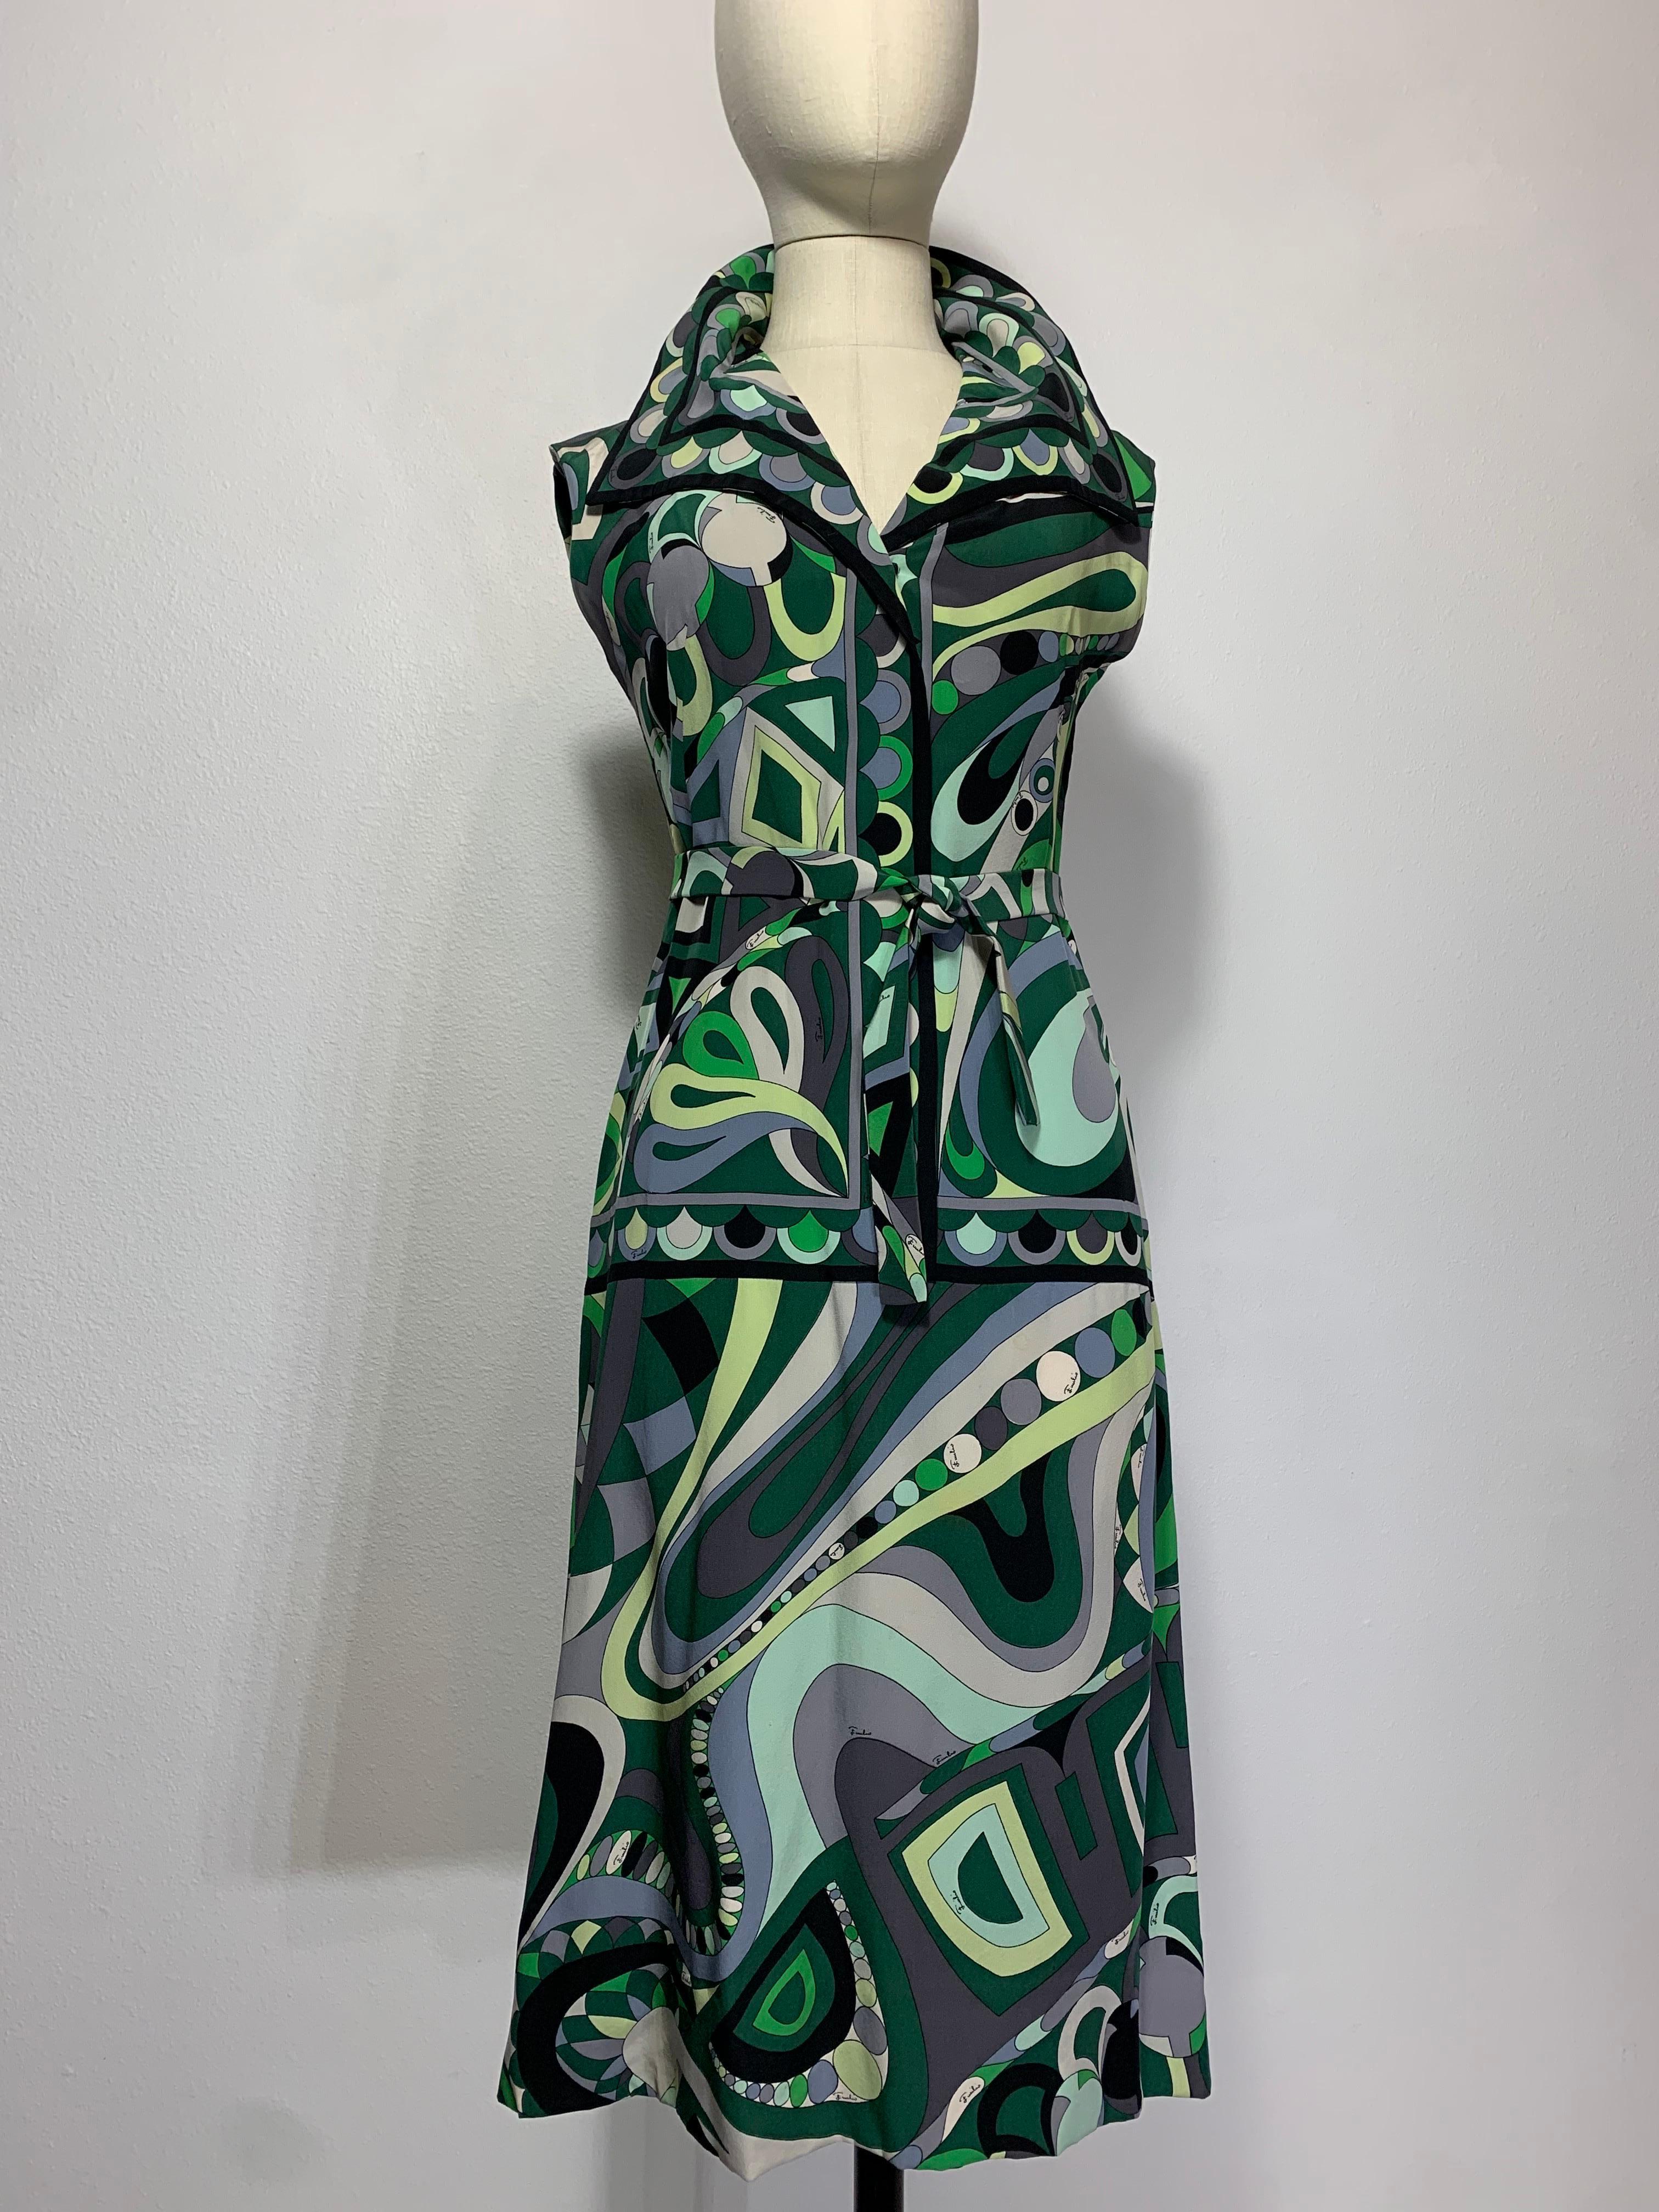 Late 1960s Emilio Pucci Mod Print Silk Day Dress: Iconic Pucci-style psychedelic print in shades of green, black and gray. This sleeveless A-line shift has the appearance of two pieces with a wide spread collar. Original matching tie belt included.